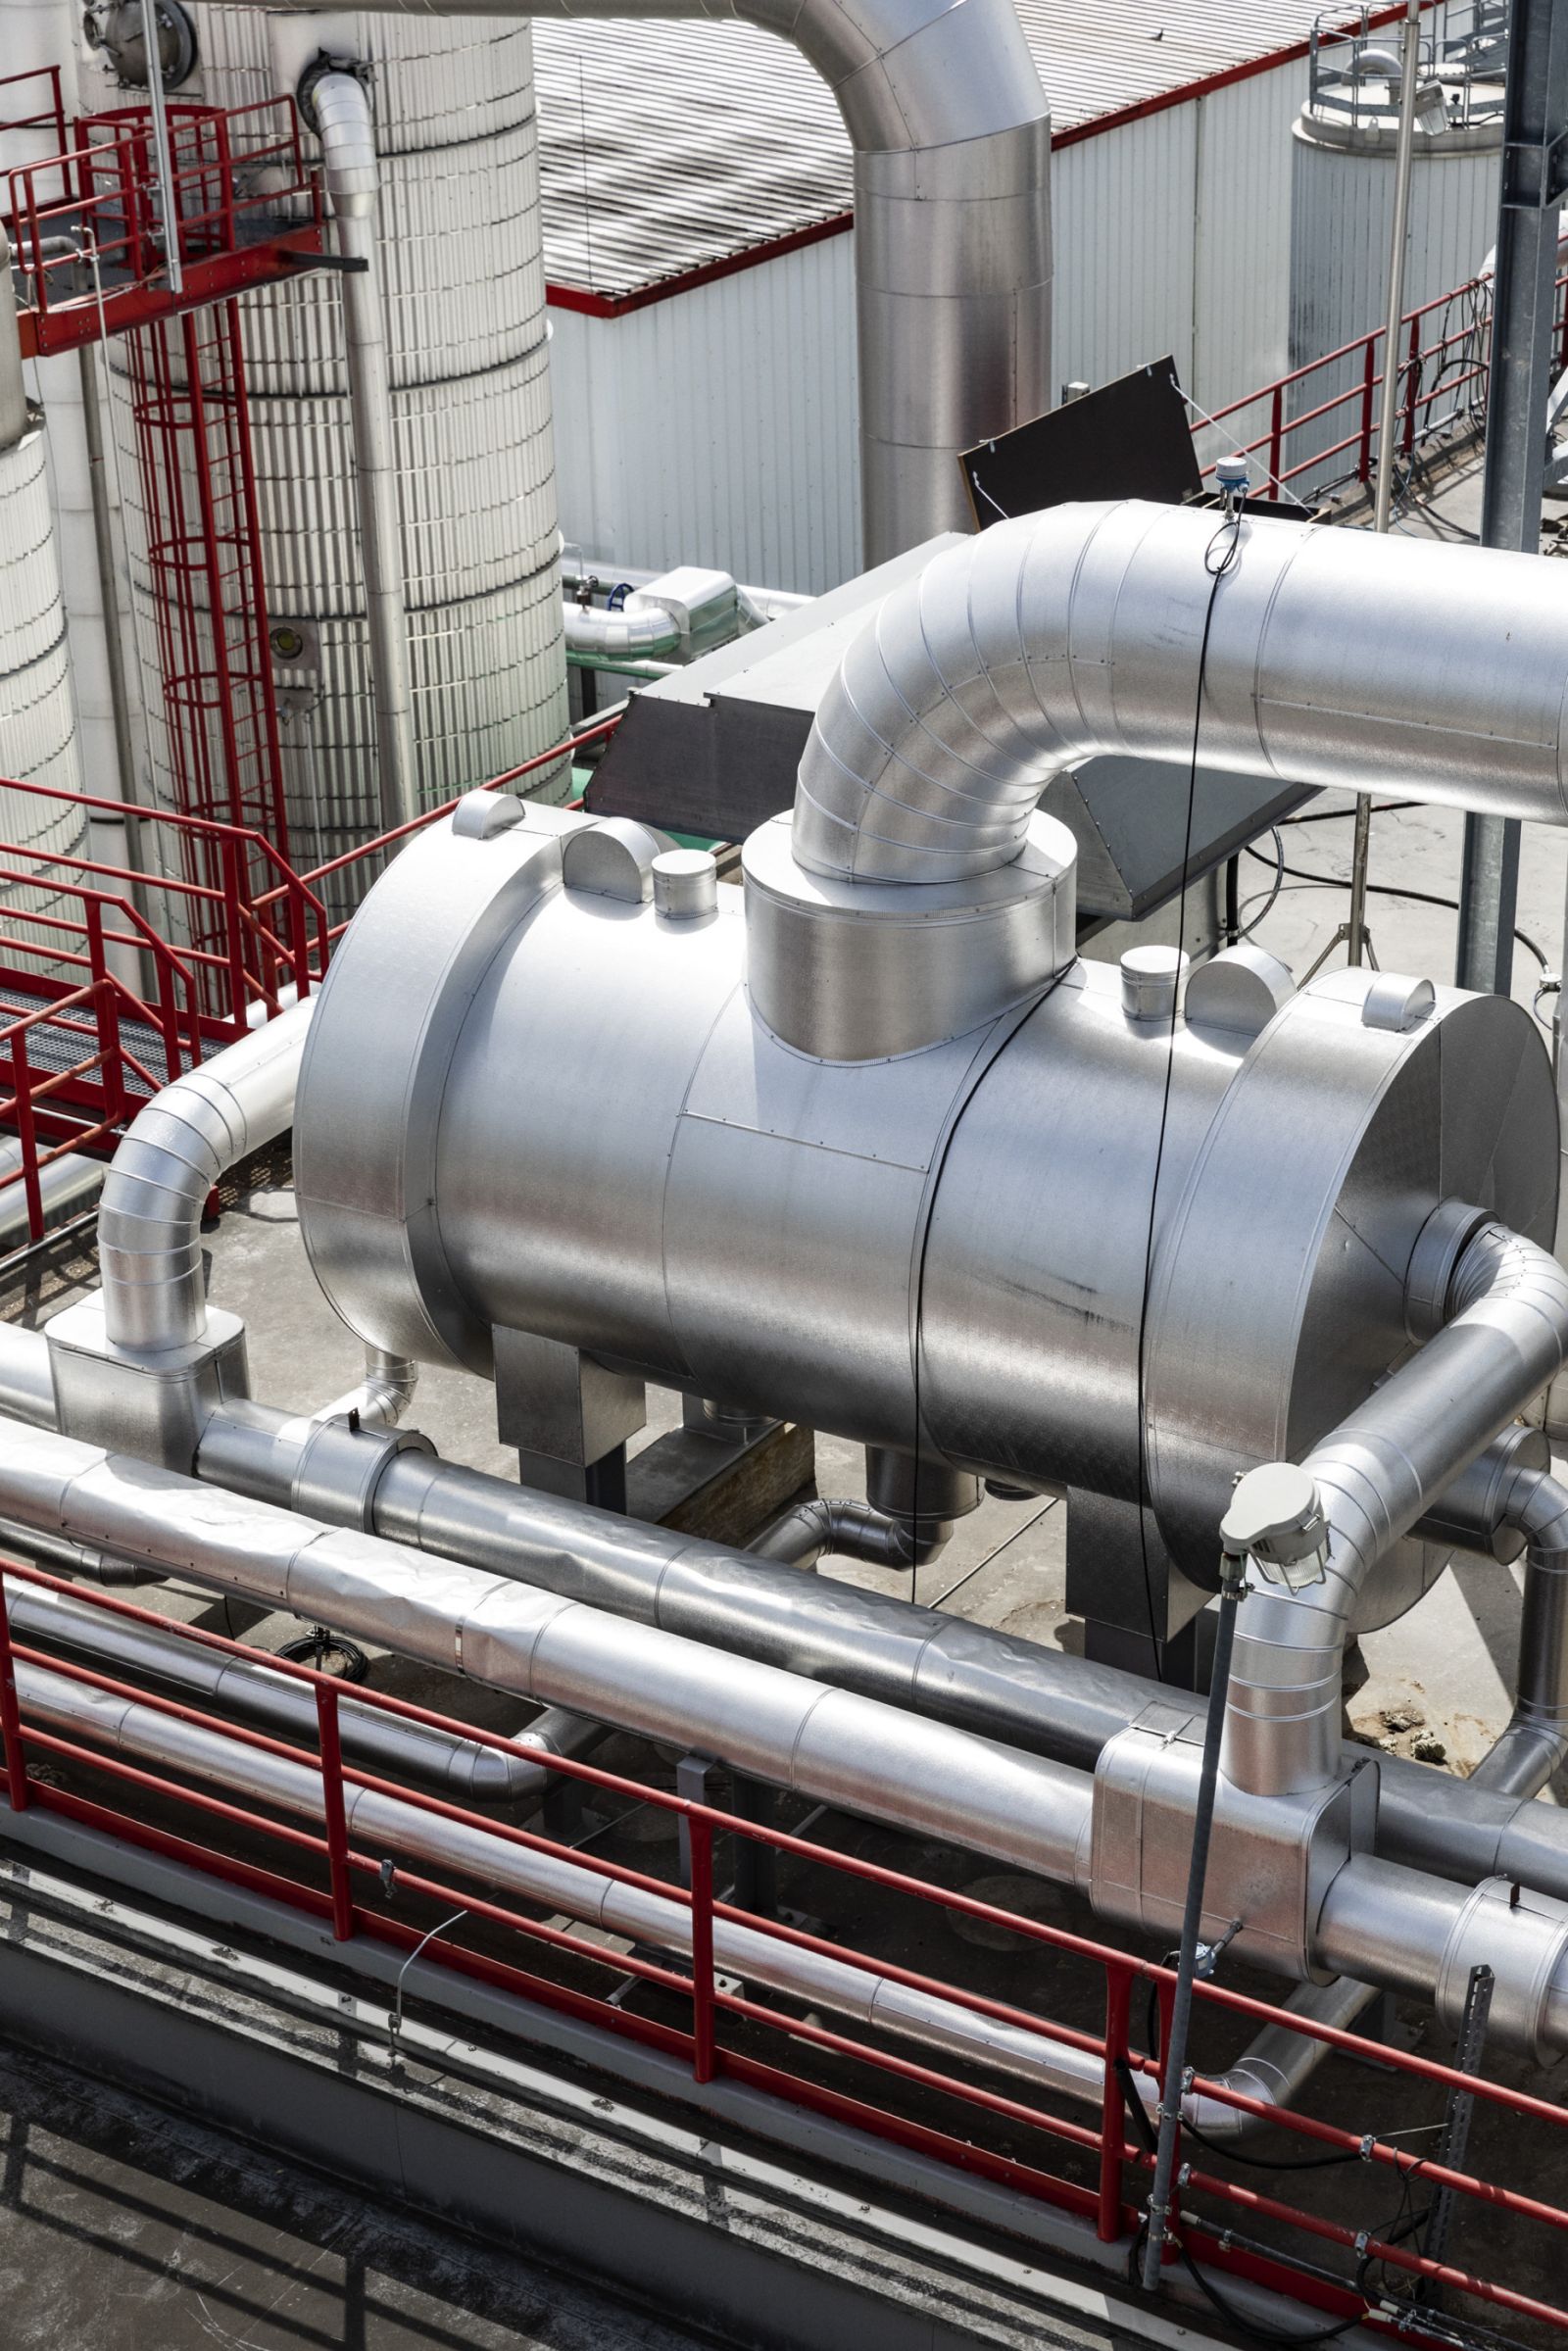 Installed on the roof, the Vahterus steam generator recovers heat energy from ethanol vapour to generate low pressure steam, which is the energy source for Pannonia Bio’s stillage evaporation system.